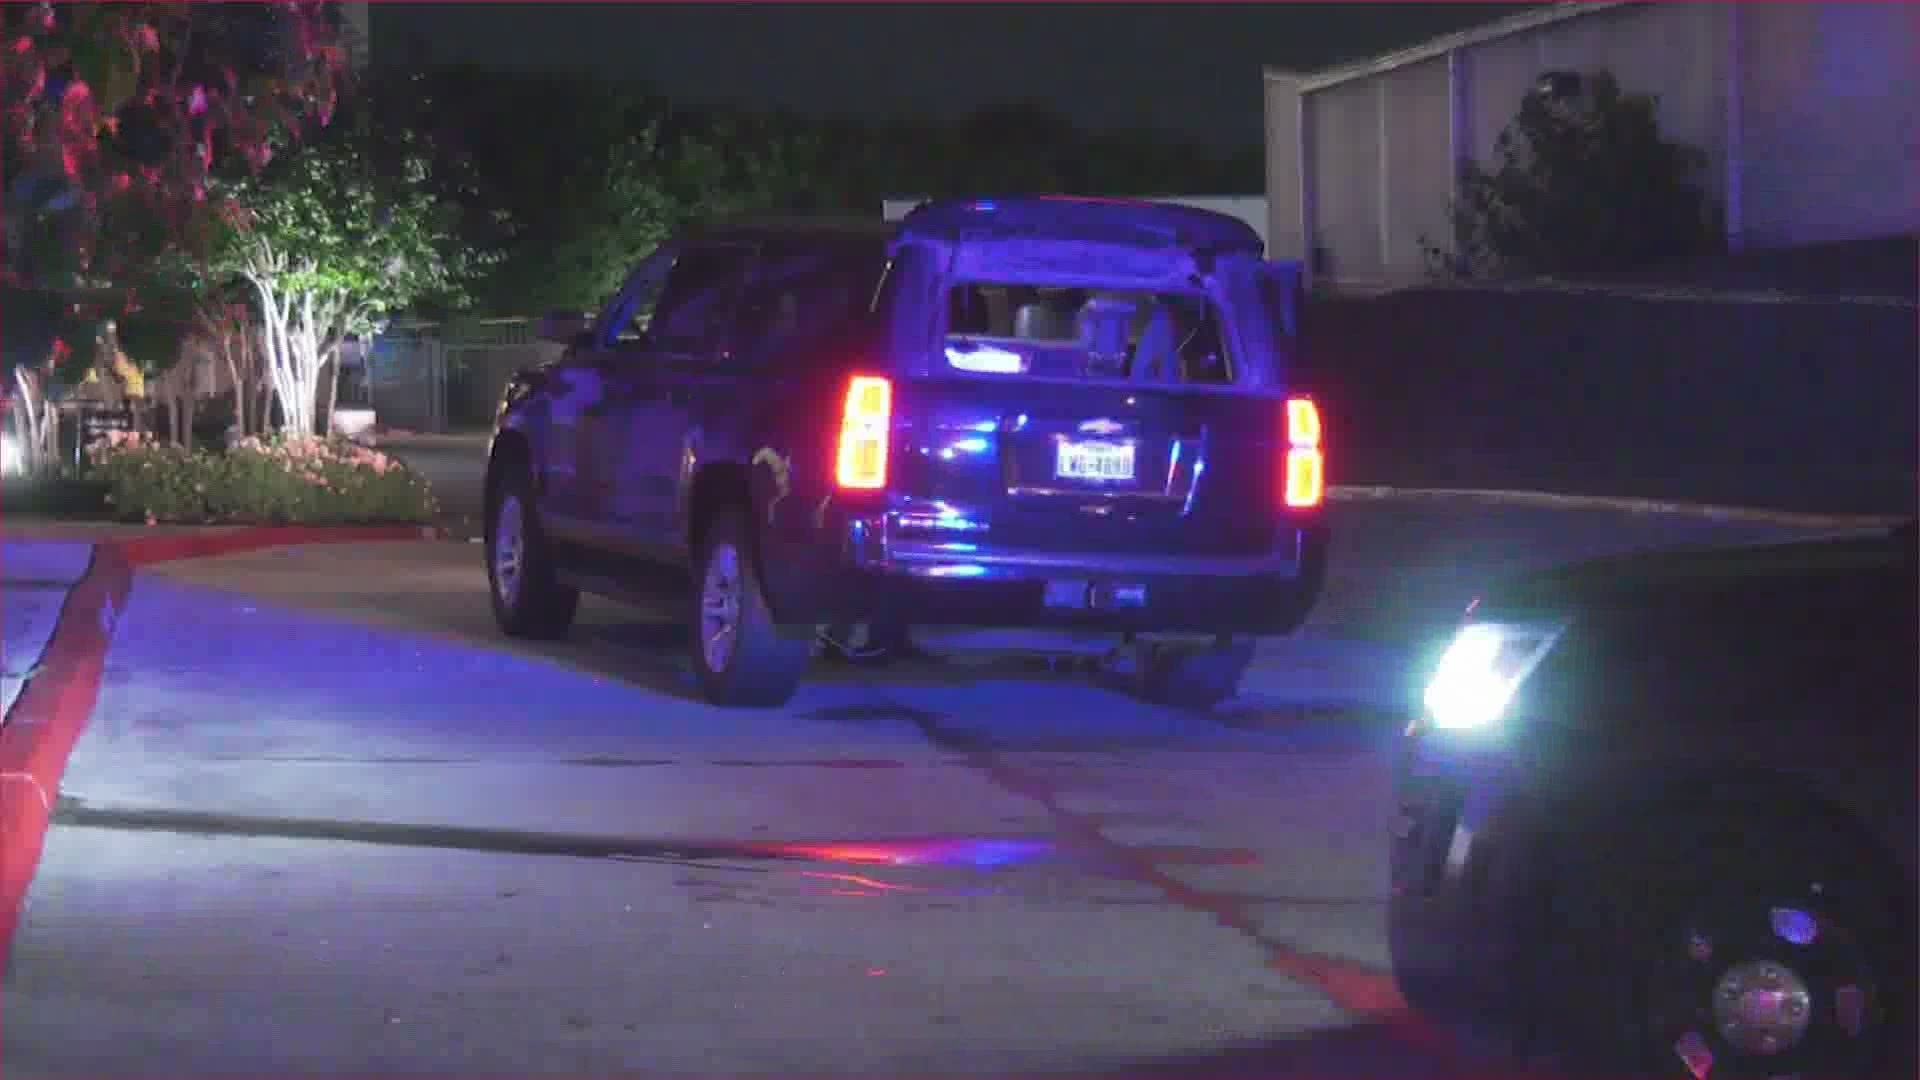 A limo driver was killed and a woman was injured early Saturday morning after a shootout on the South Loop. There is no suspect information at this time.